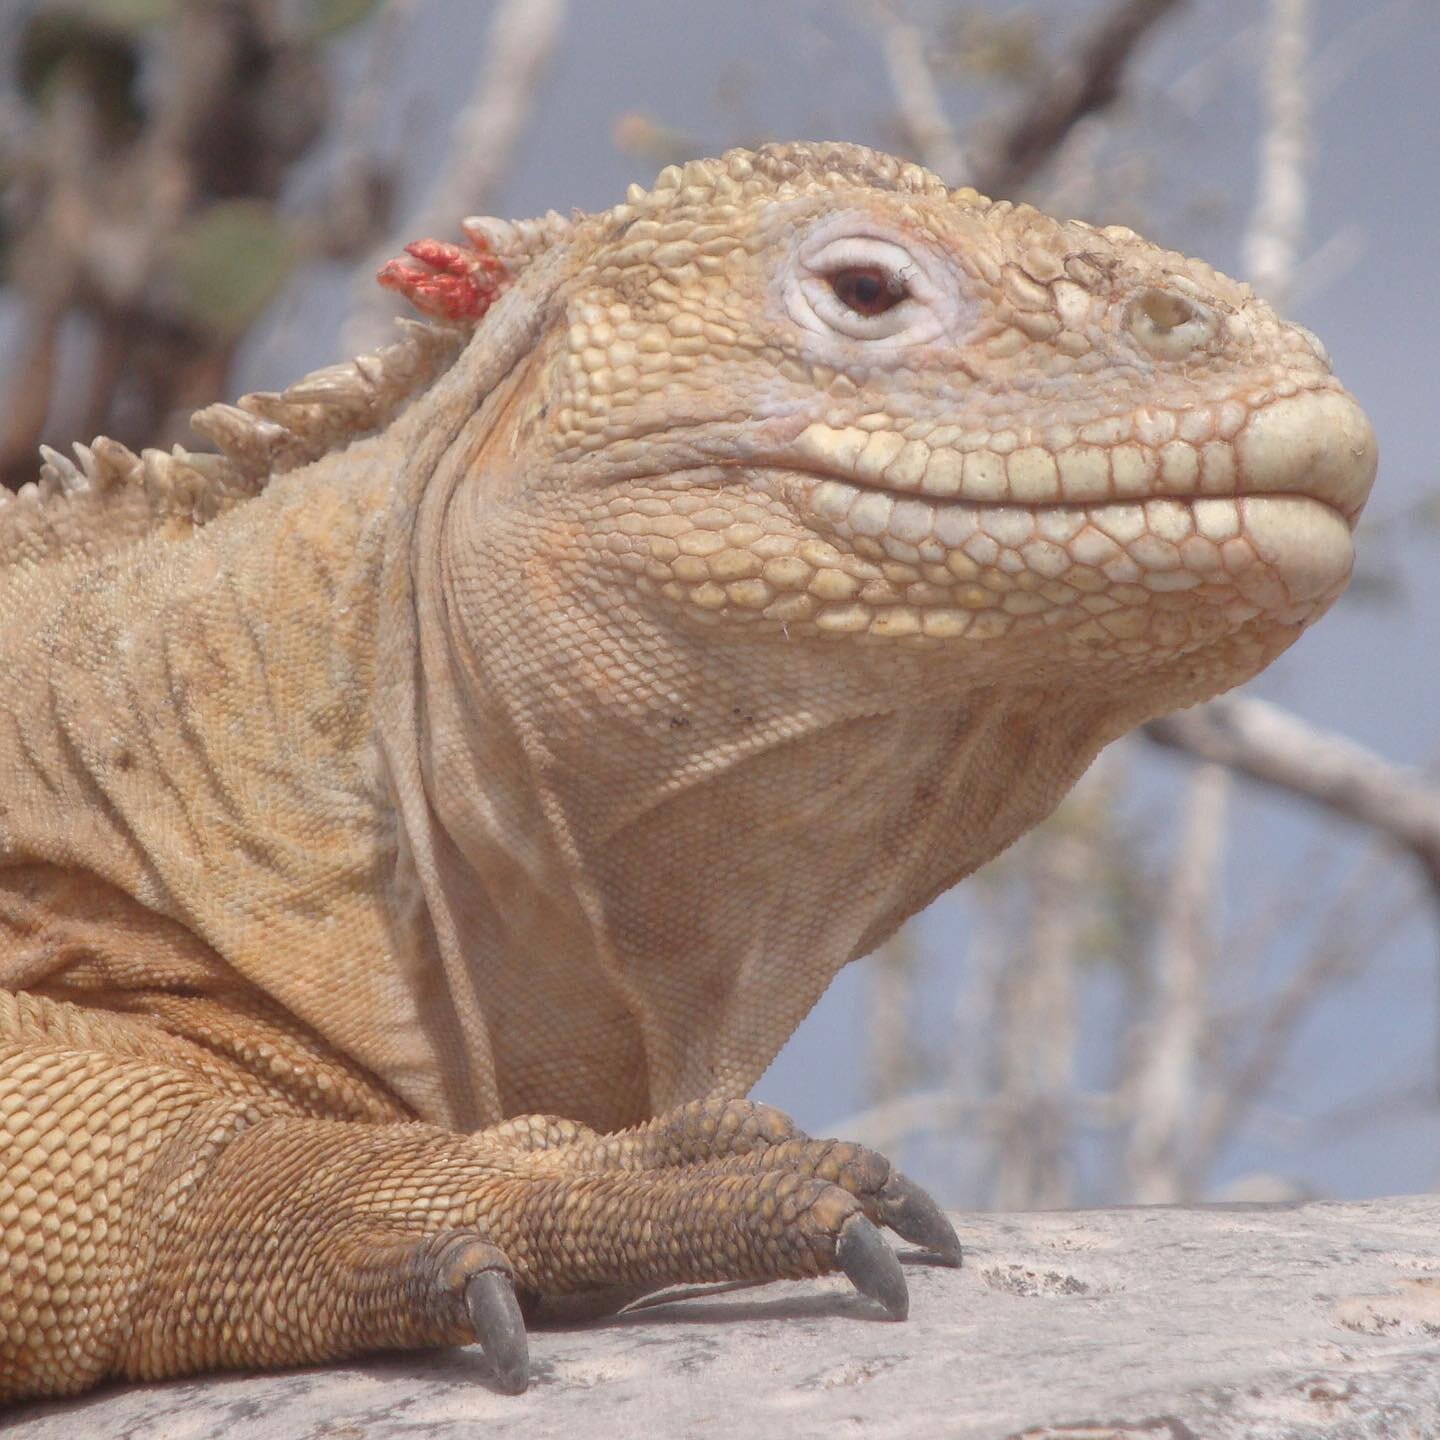 The Santa Fe Land Iguana is just one of two distinct subspecies of Gal&aacute;pagos land iguanas, known for its unique pale color. They can be seen on INTEGRITY&rsquo;s eastern route when guests visit the island of Santa Fe. 
#galapagos #wildlife #wi